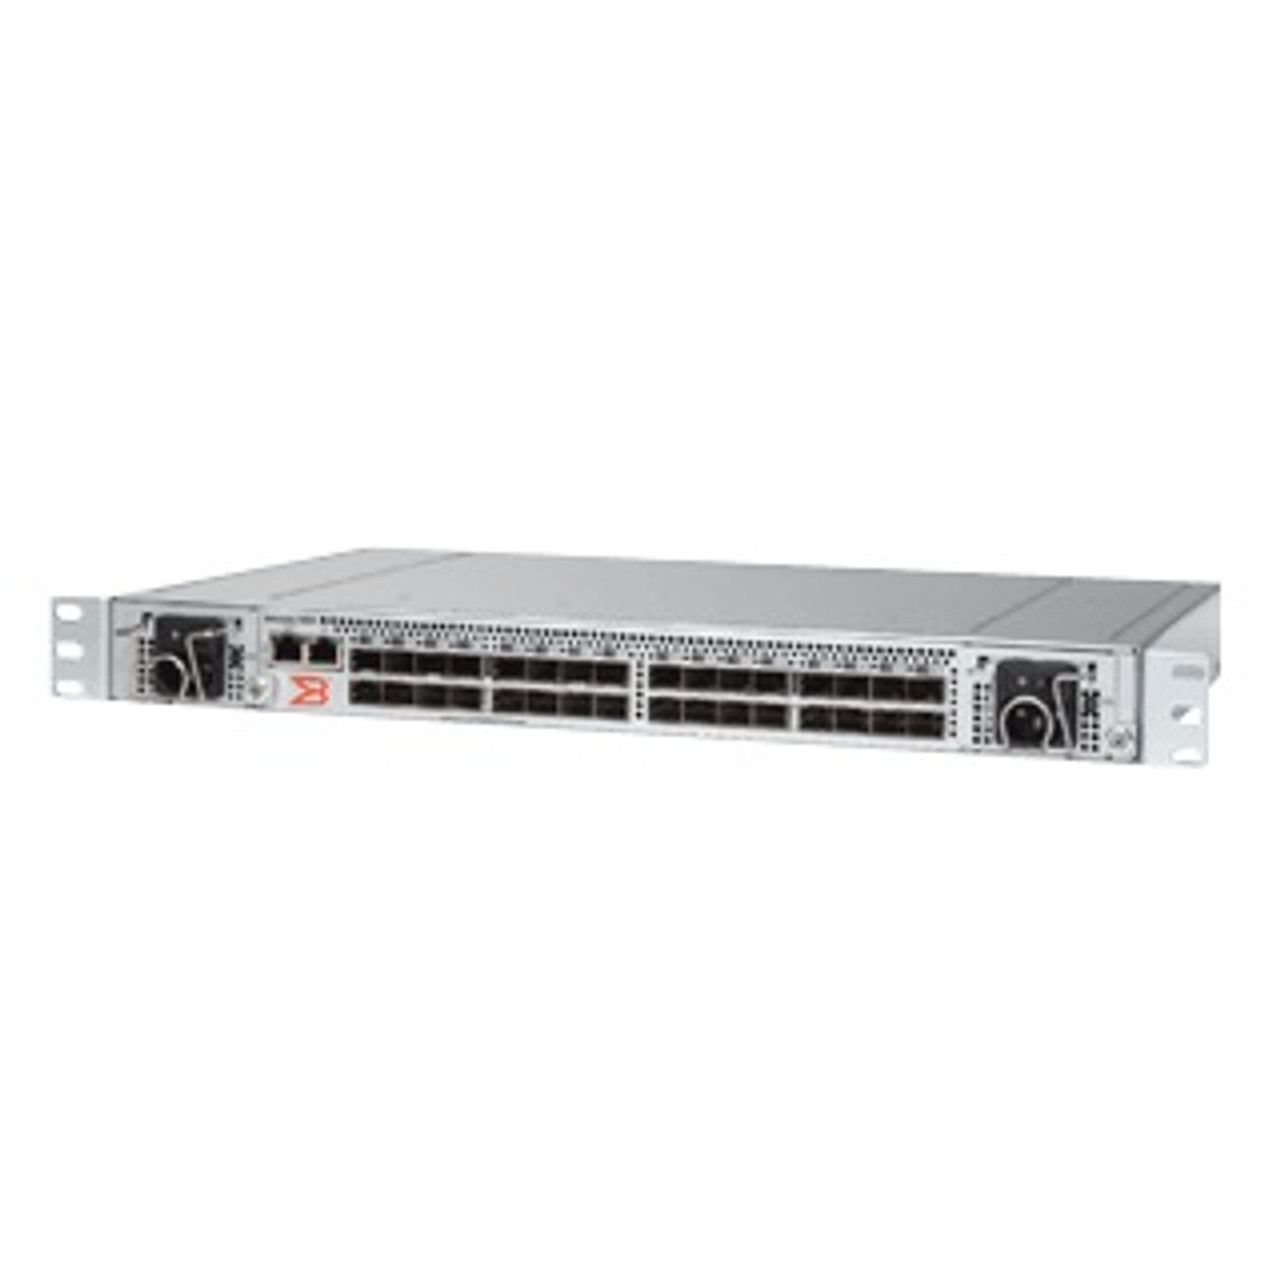 BR-360-0008-A - Brocade 300 Switch - 24 Ports - 4Gbps